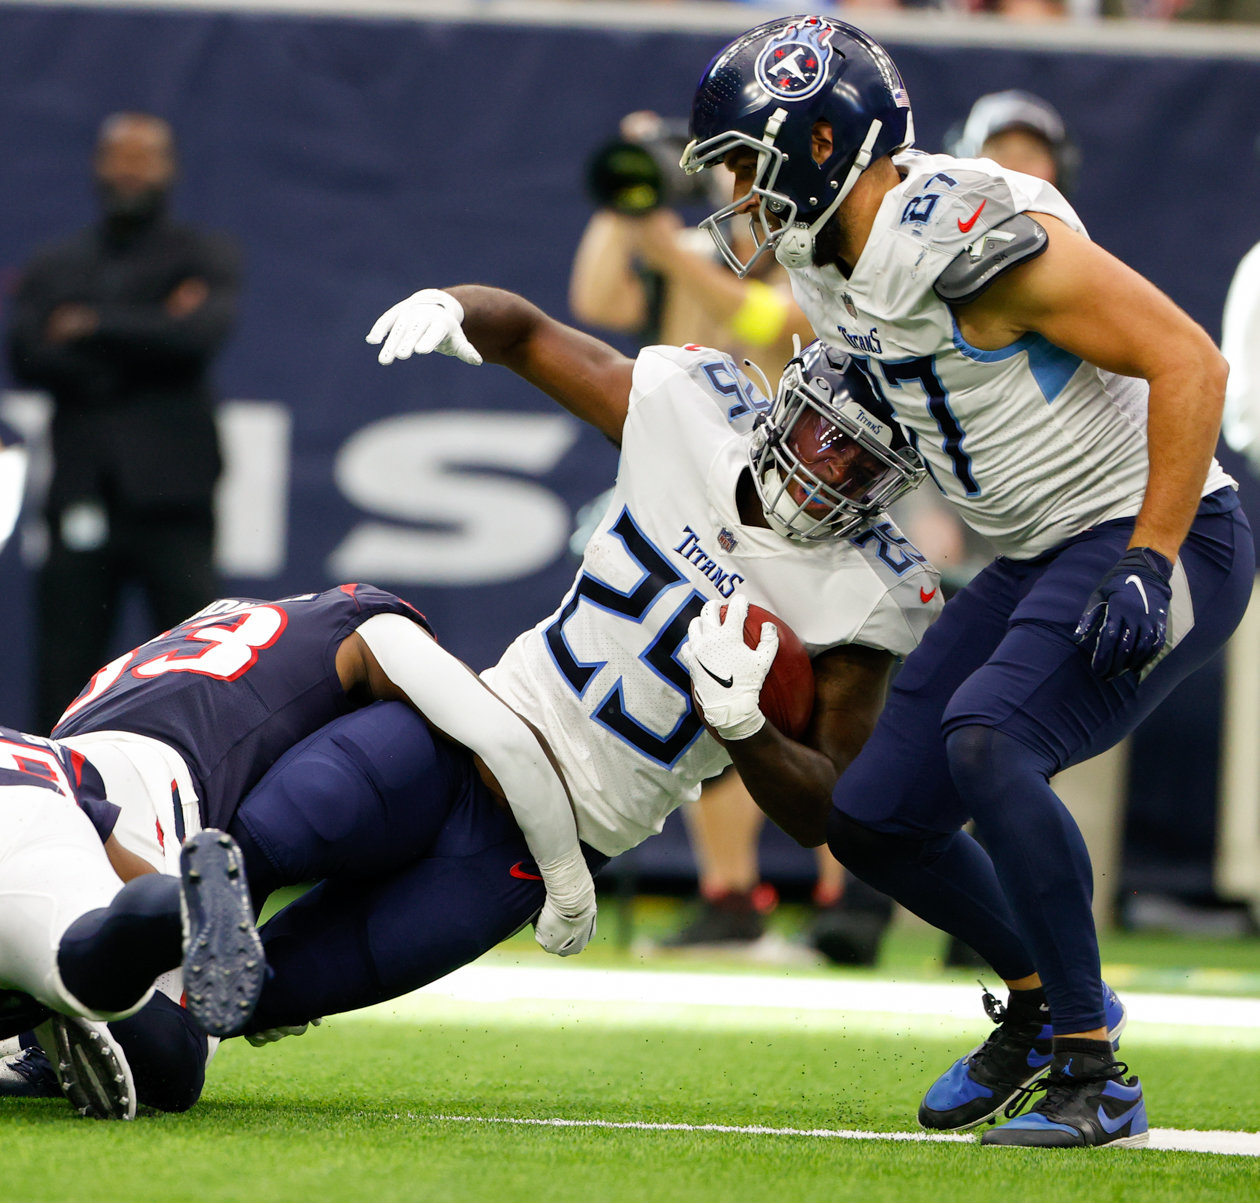 Titans running back Hassan Haskins (25) is tackled on a carry during an NFL game between the Texans and the Titans on Oct. 30, 2022 in Houston.